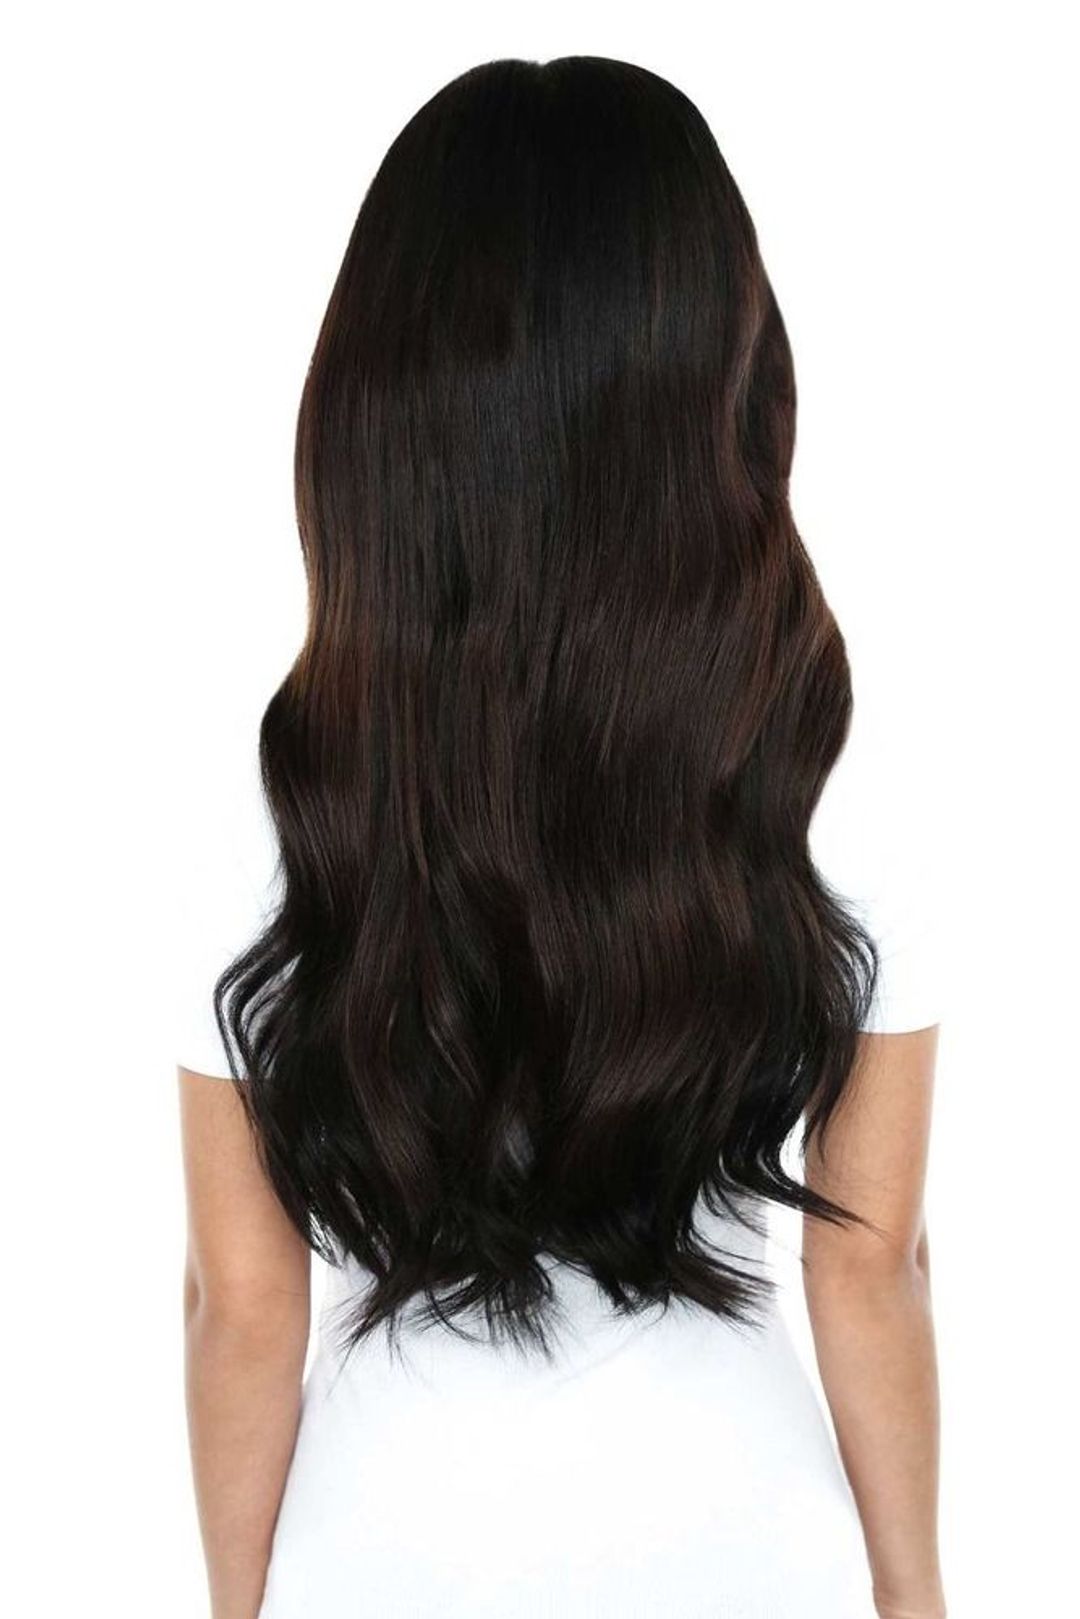 Beauty Works Gold Double Weft Extensions - Raven,20"